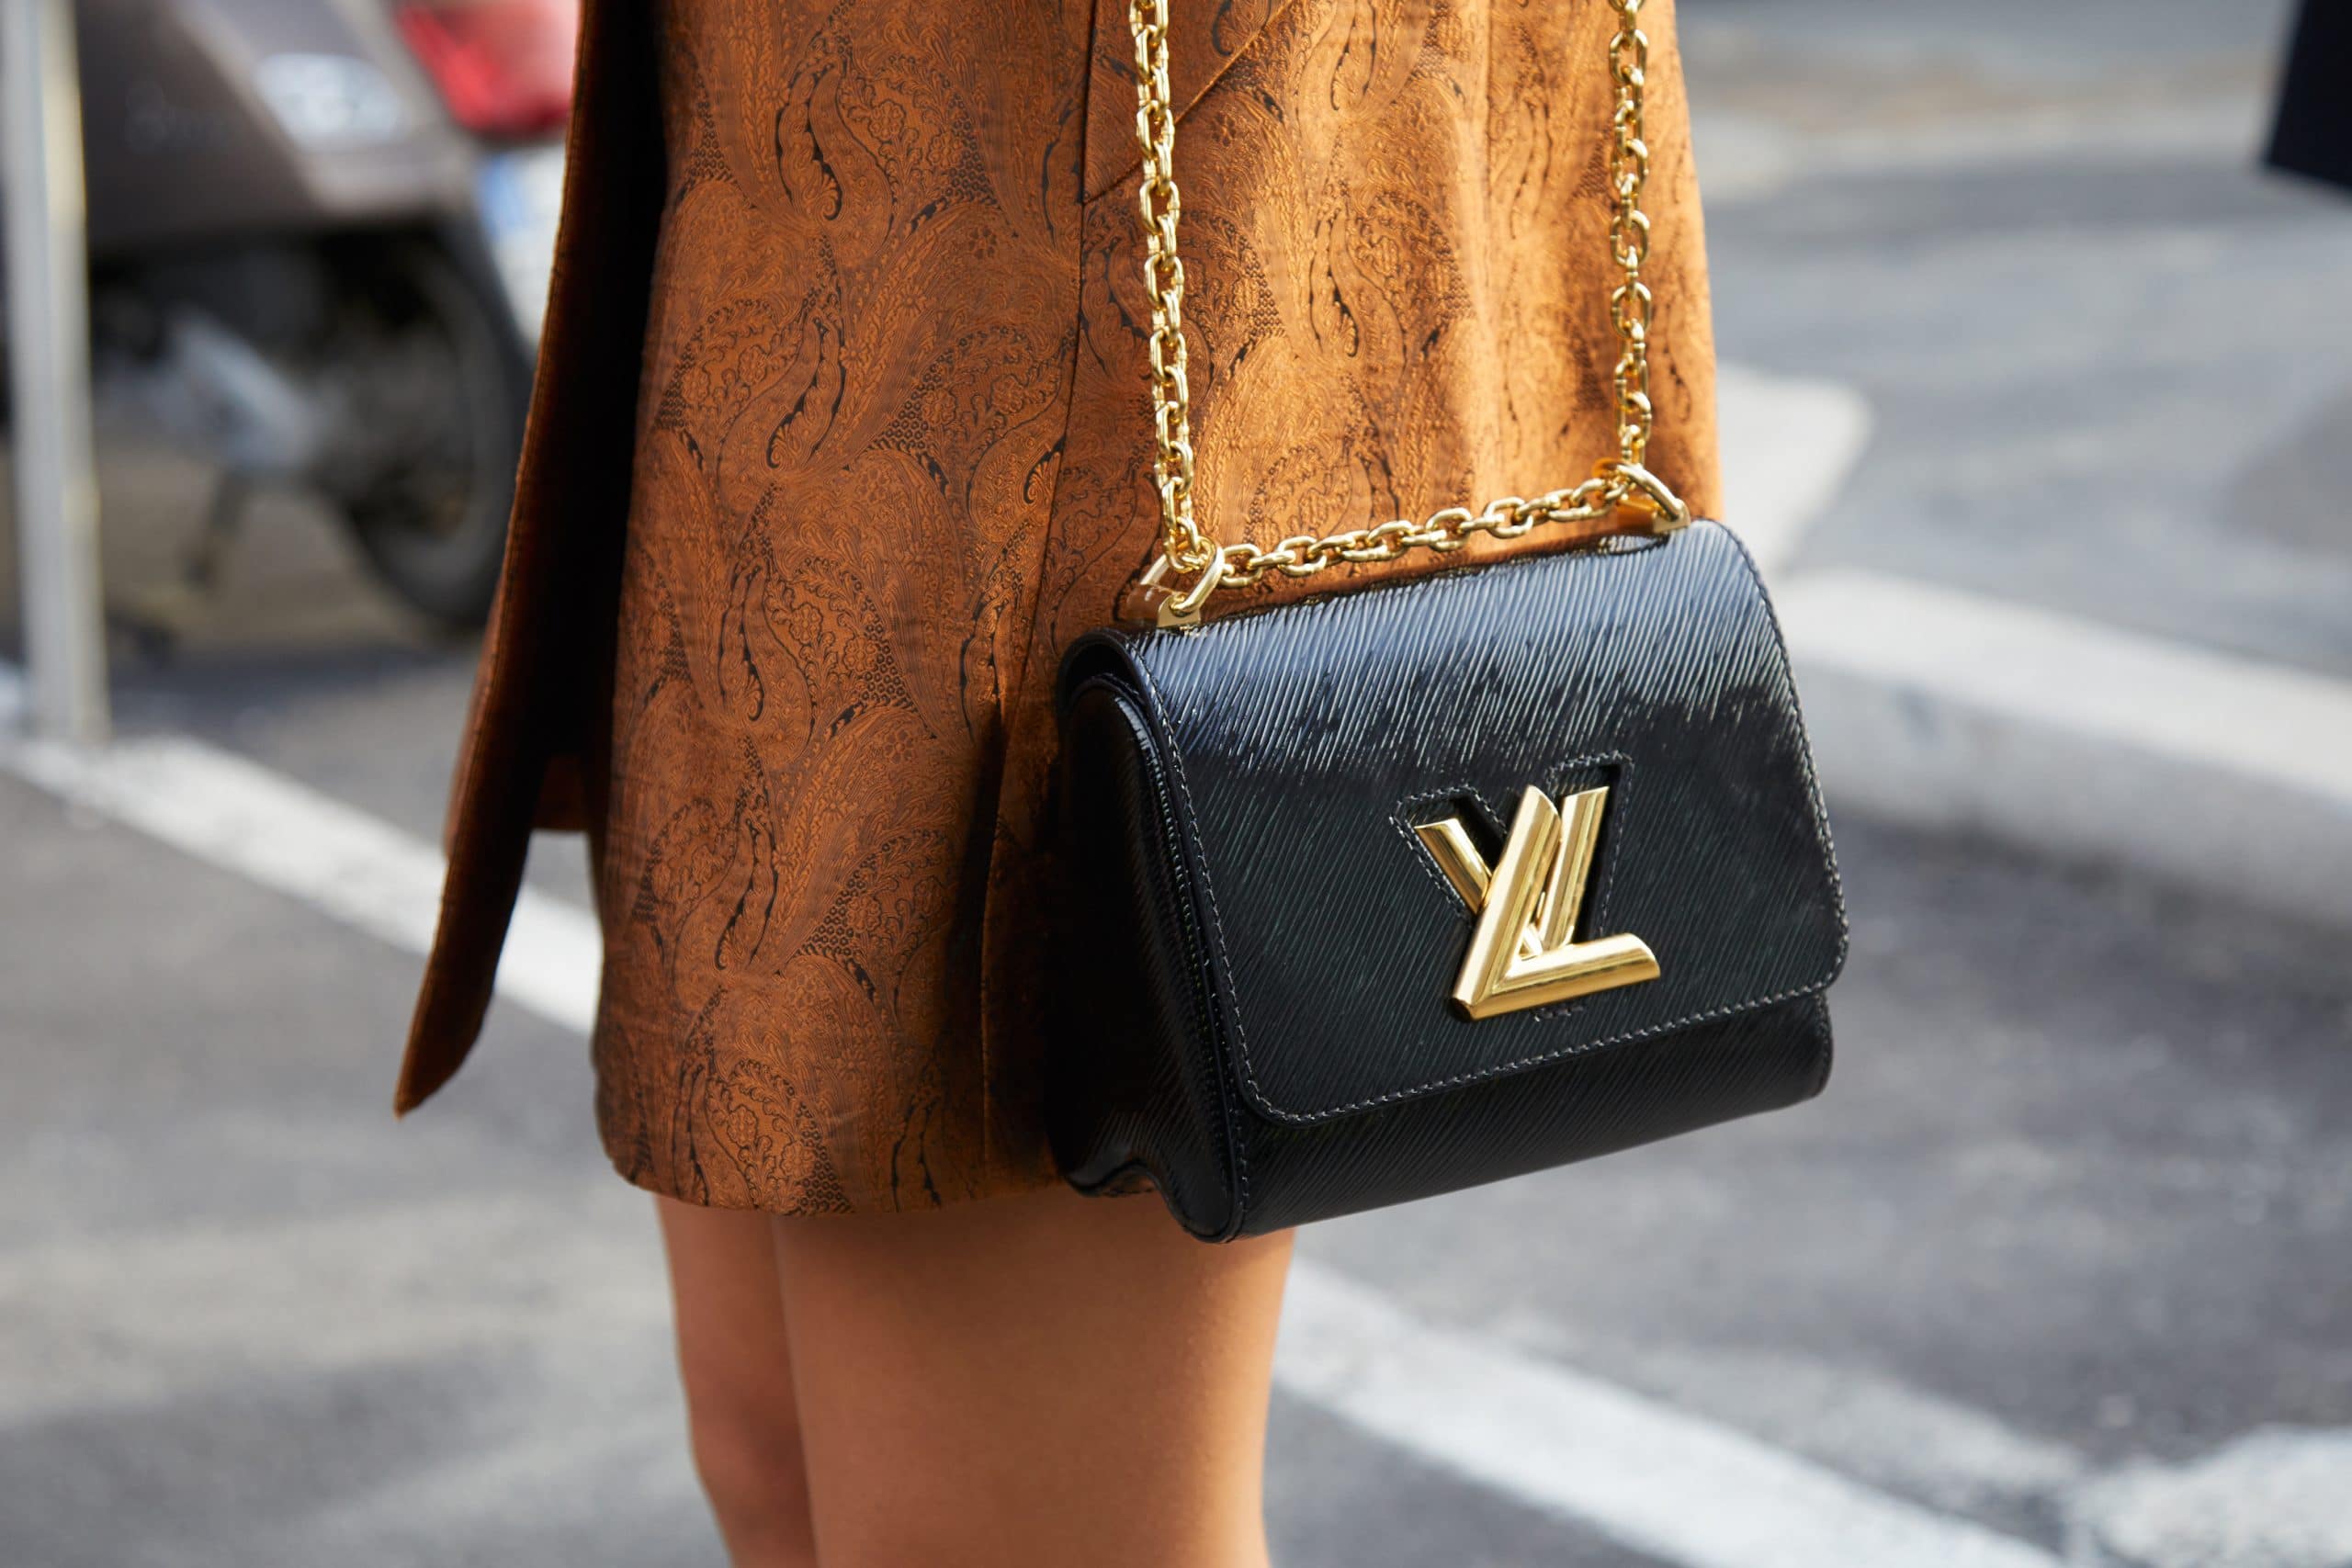 Read more about the article Best LV Black Bag: 9 Classic Louis Vuitton Black Bags You Need to Add to Your Collection